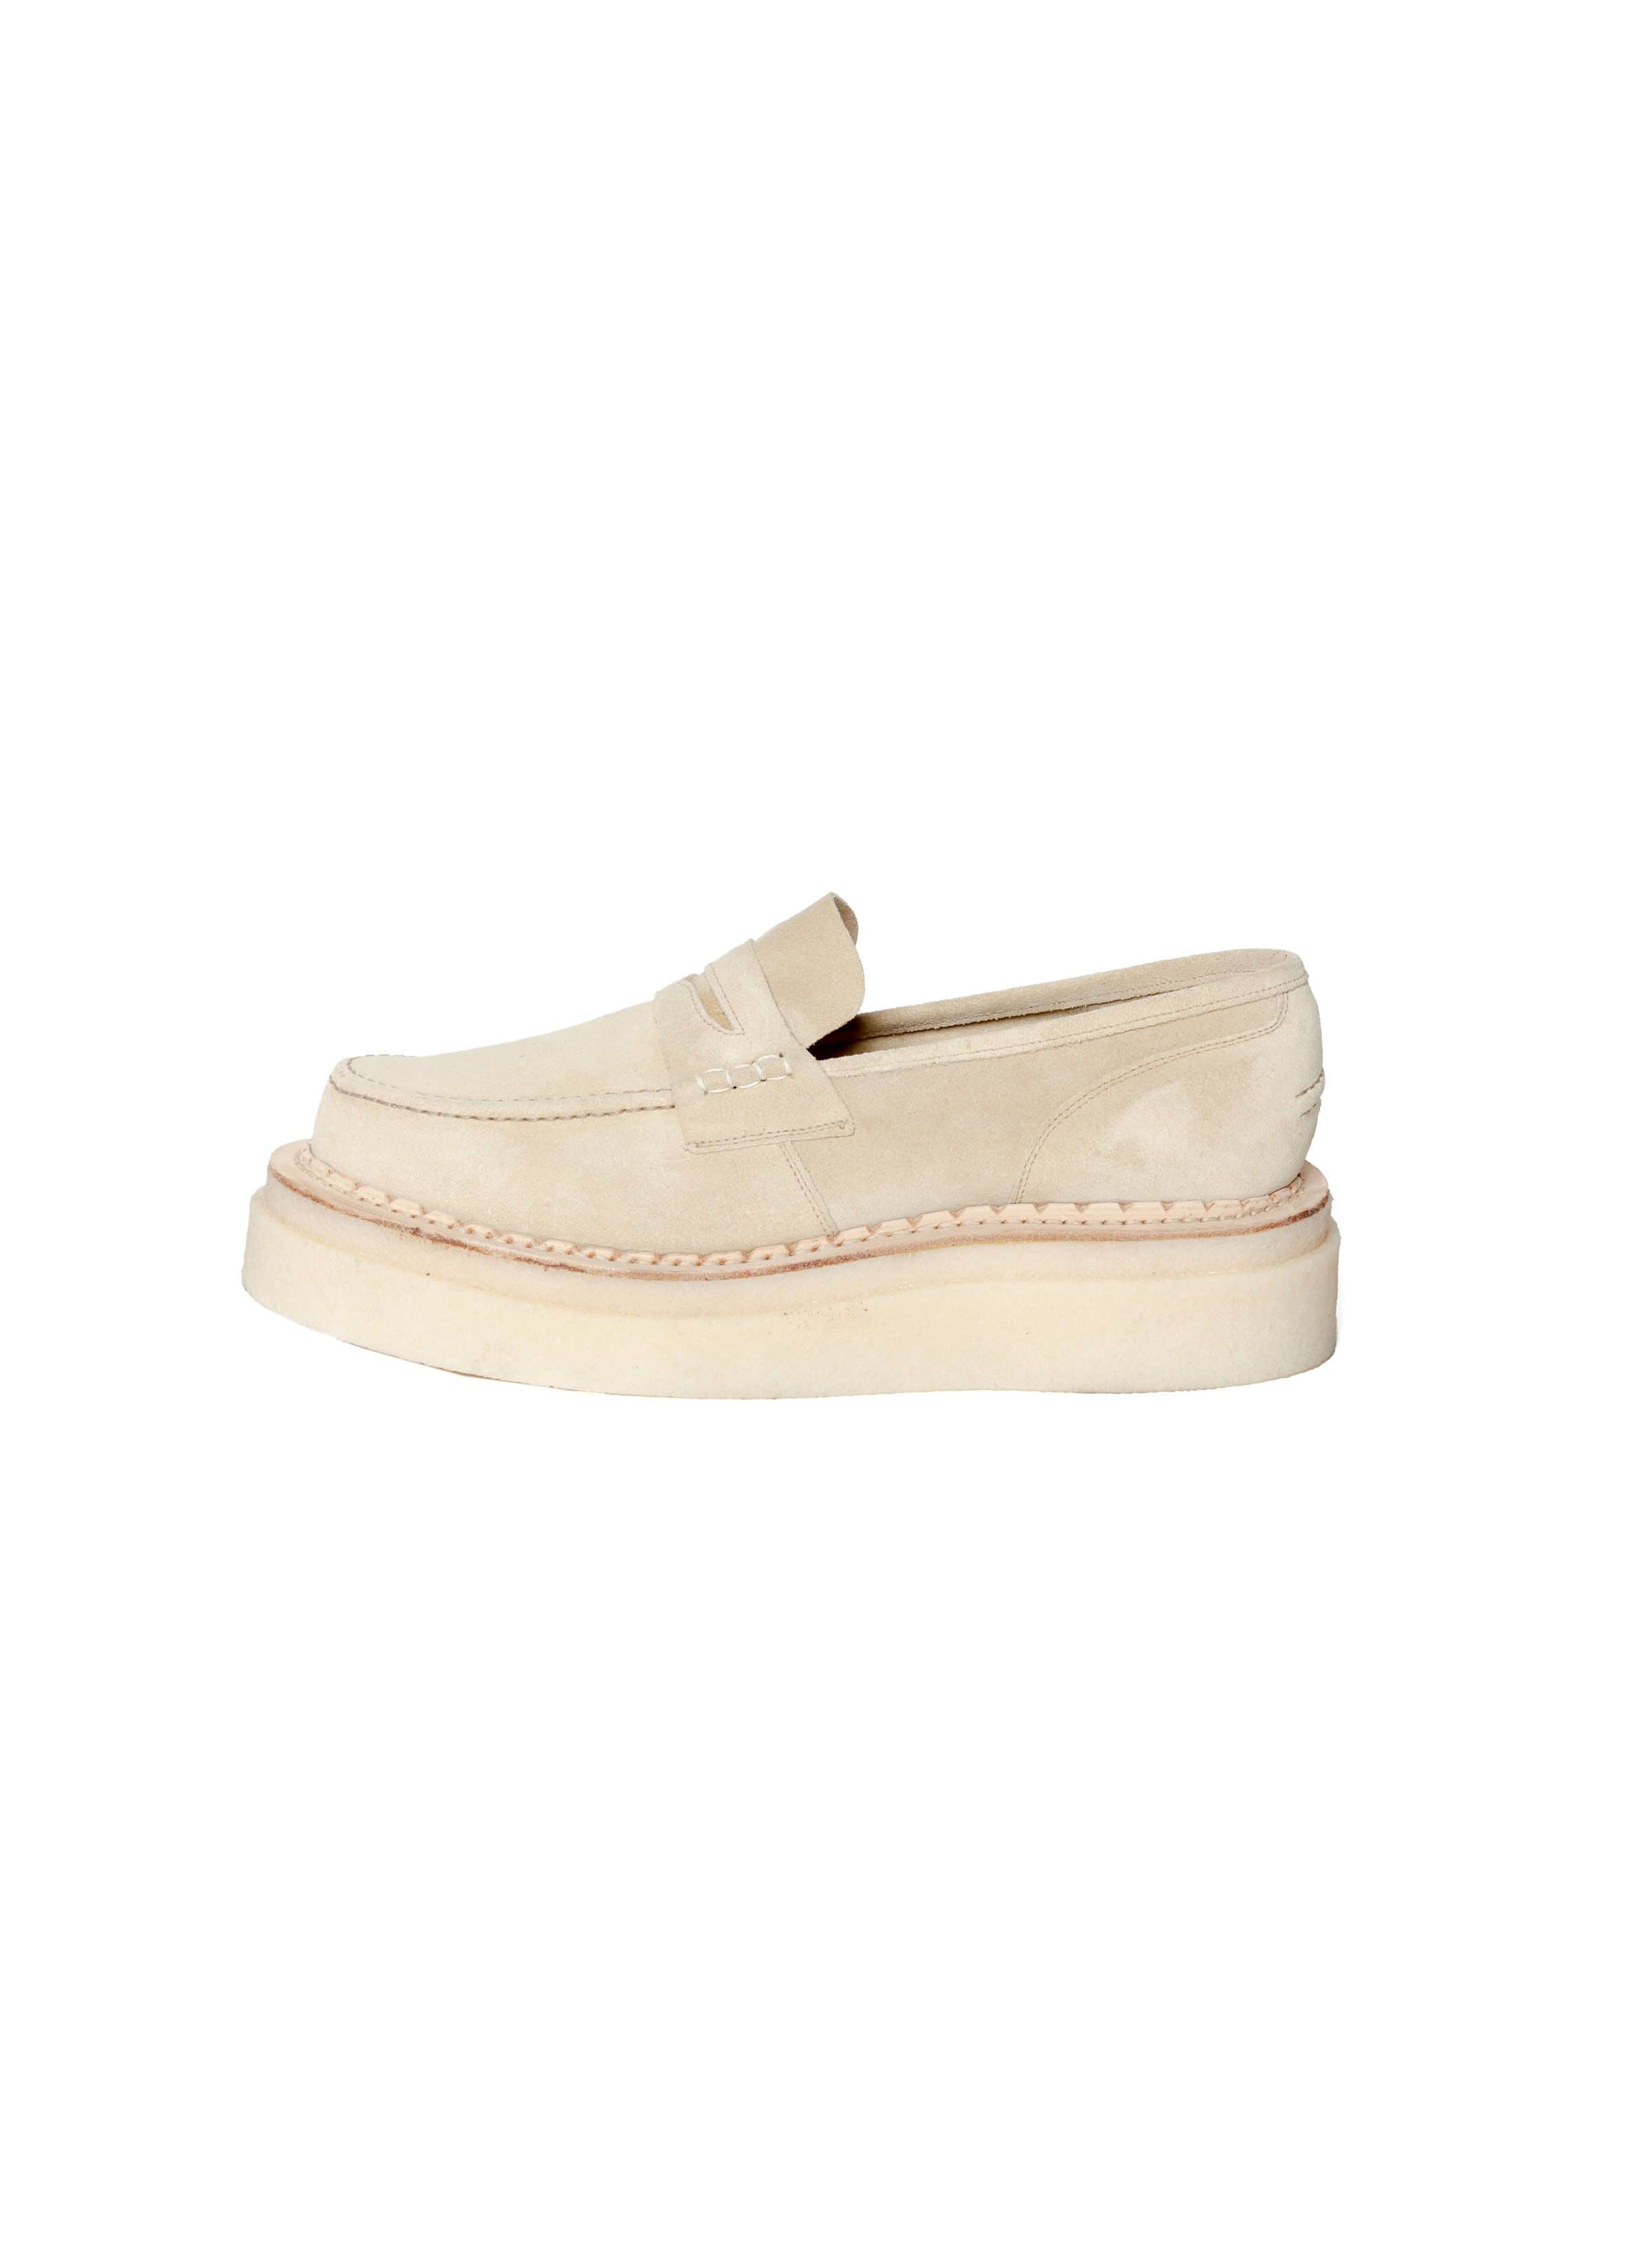 sacai x George Cox / Double Sole Coin Loafer 詳細画像 BEIGE 1